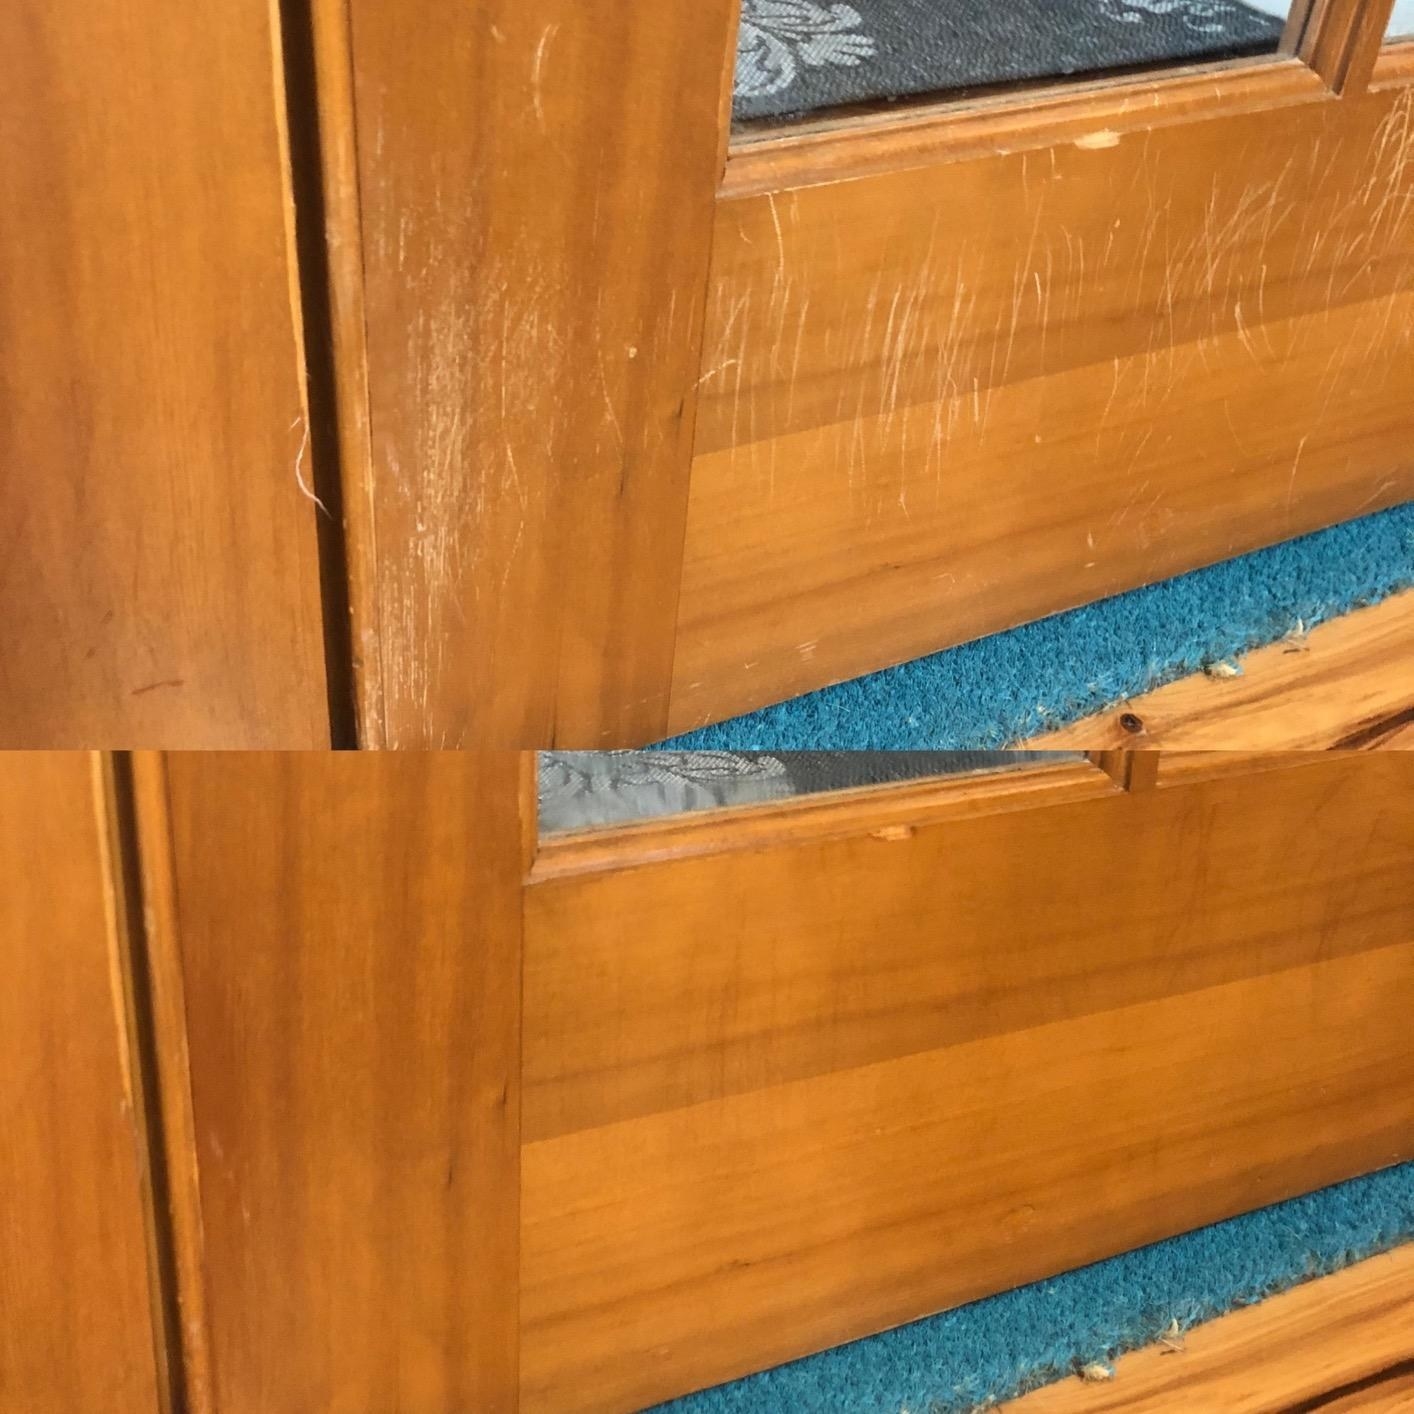 Before of the bottom of a wood door with noticeable scratches and fading and after photo of the same door looking brand new and free of scratches after applying the polish